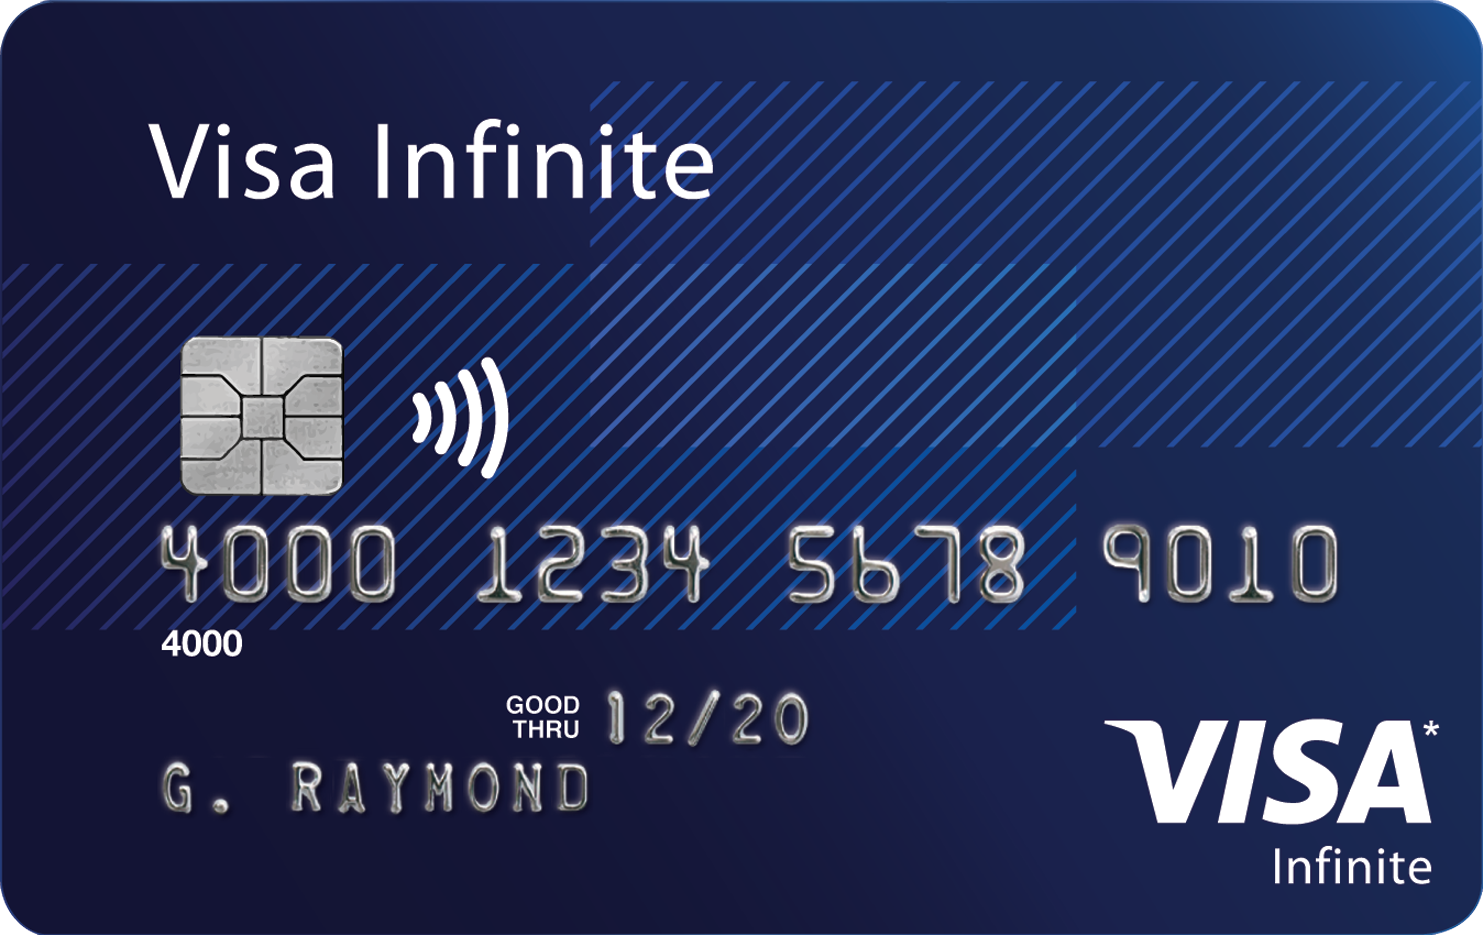 are you a visa infinite cardholder